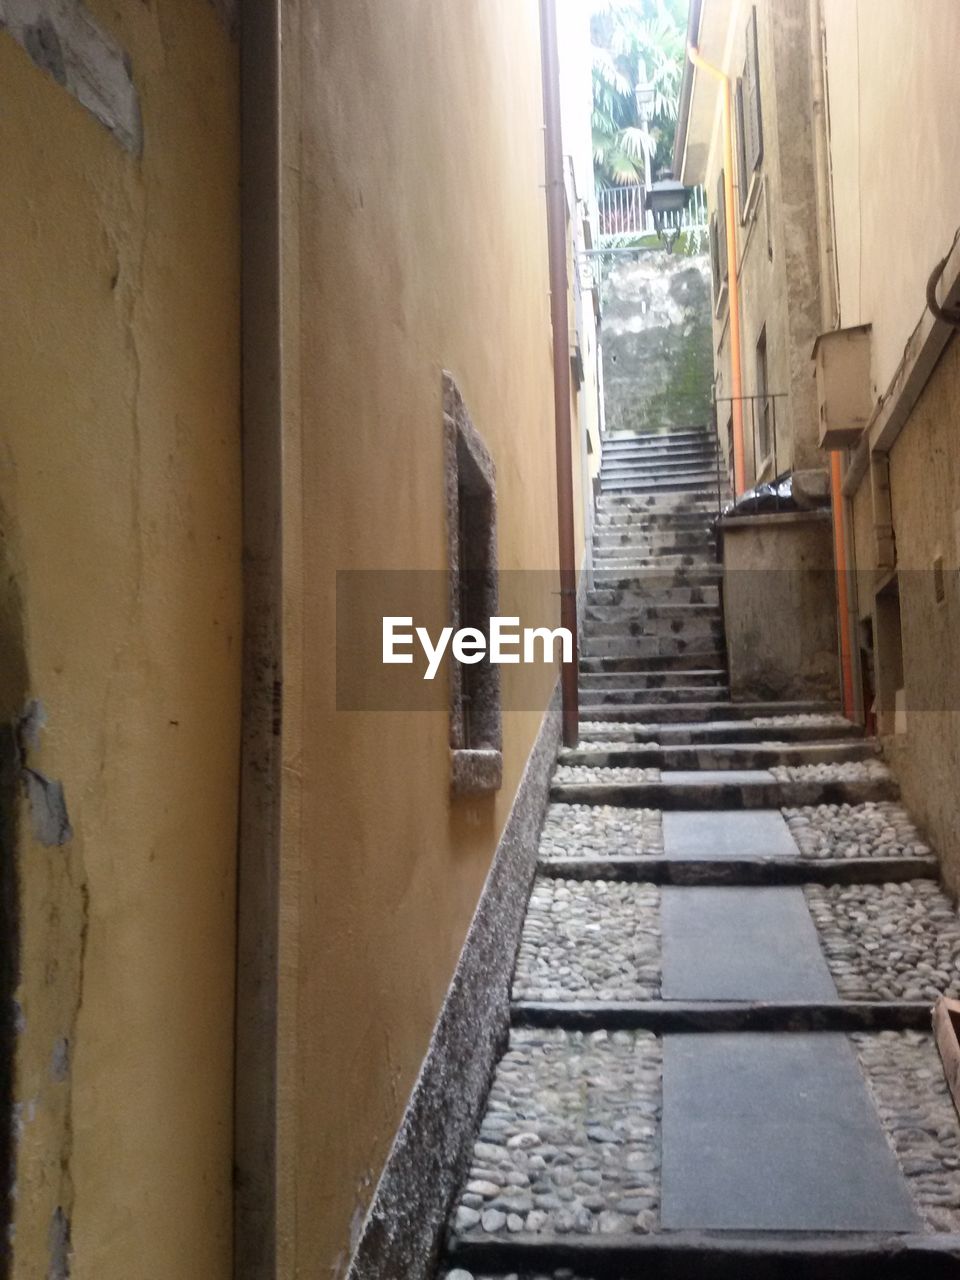 NARROW ALLEY WITH BUILDINGS IN BACKGROUND